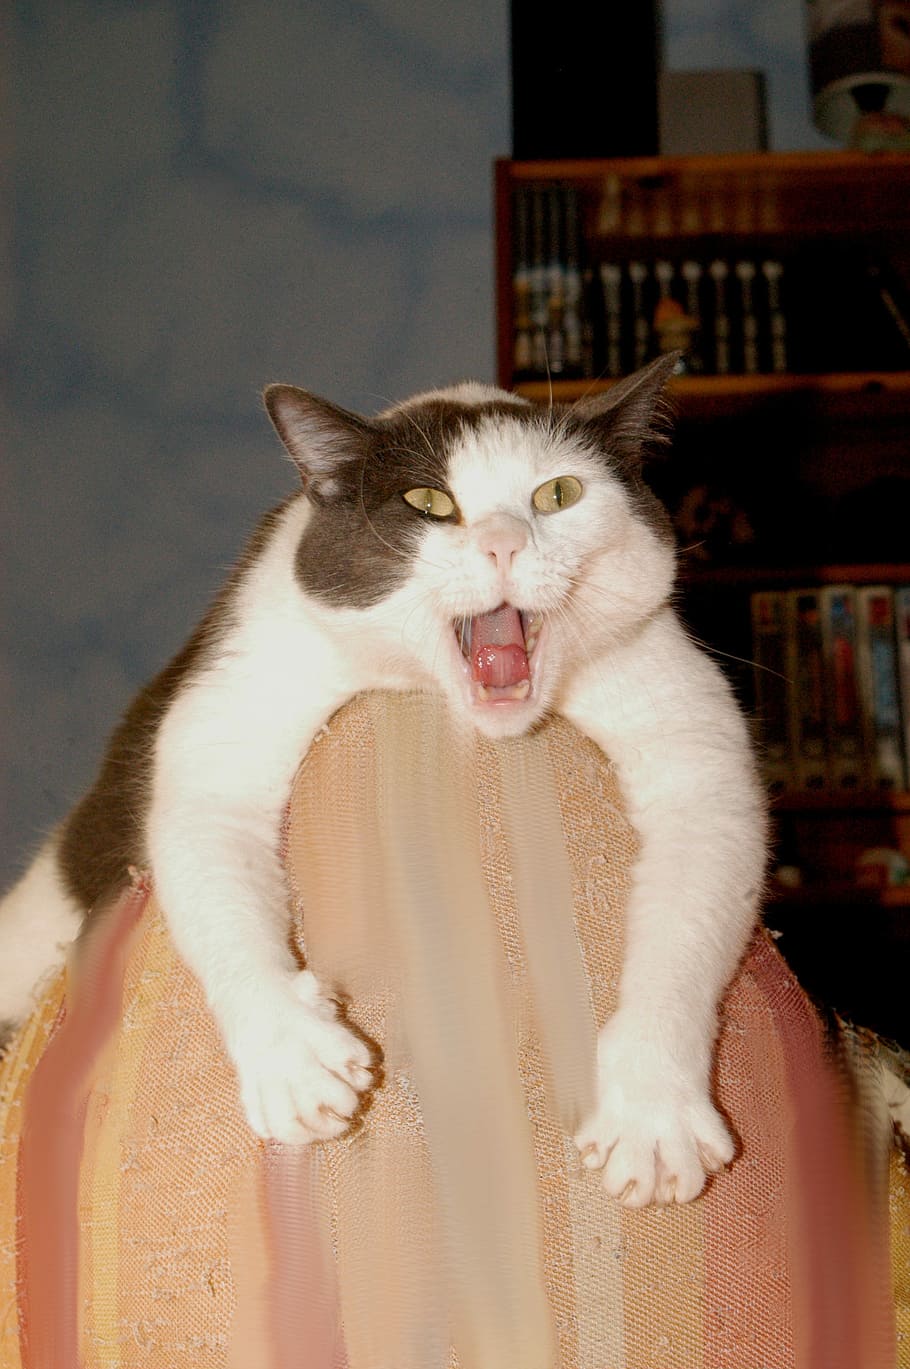 white, black, cat, beige, textile, black cat, funny pictures, yawn, pets, one animal